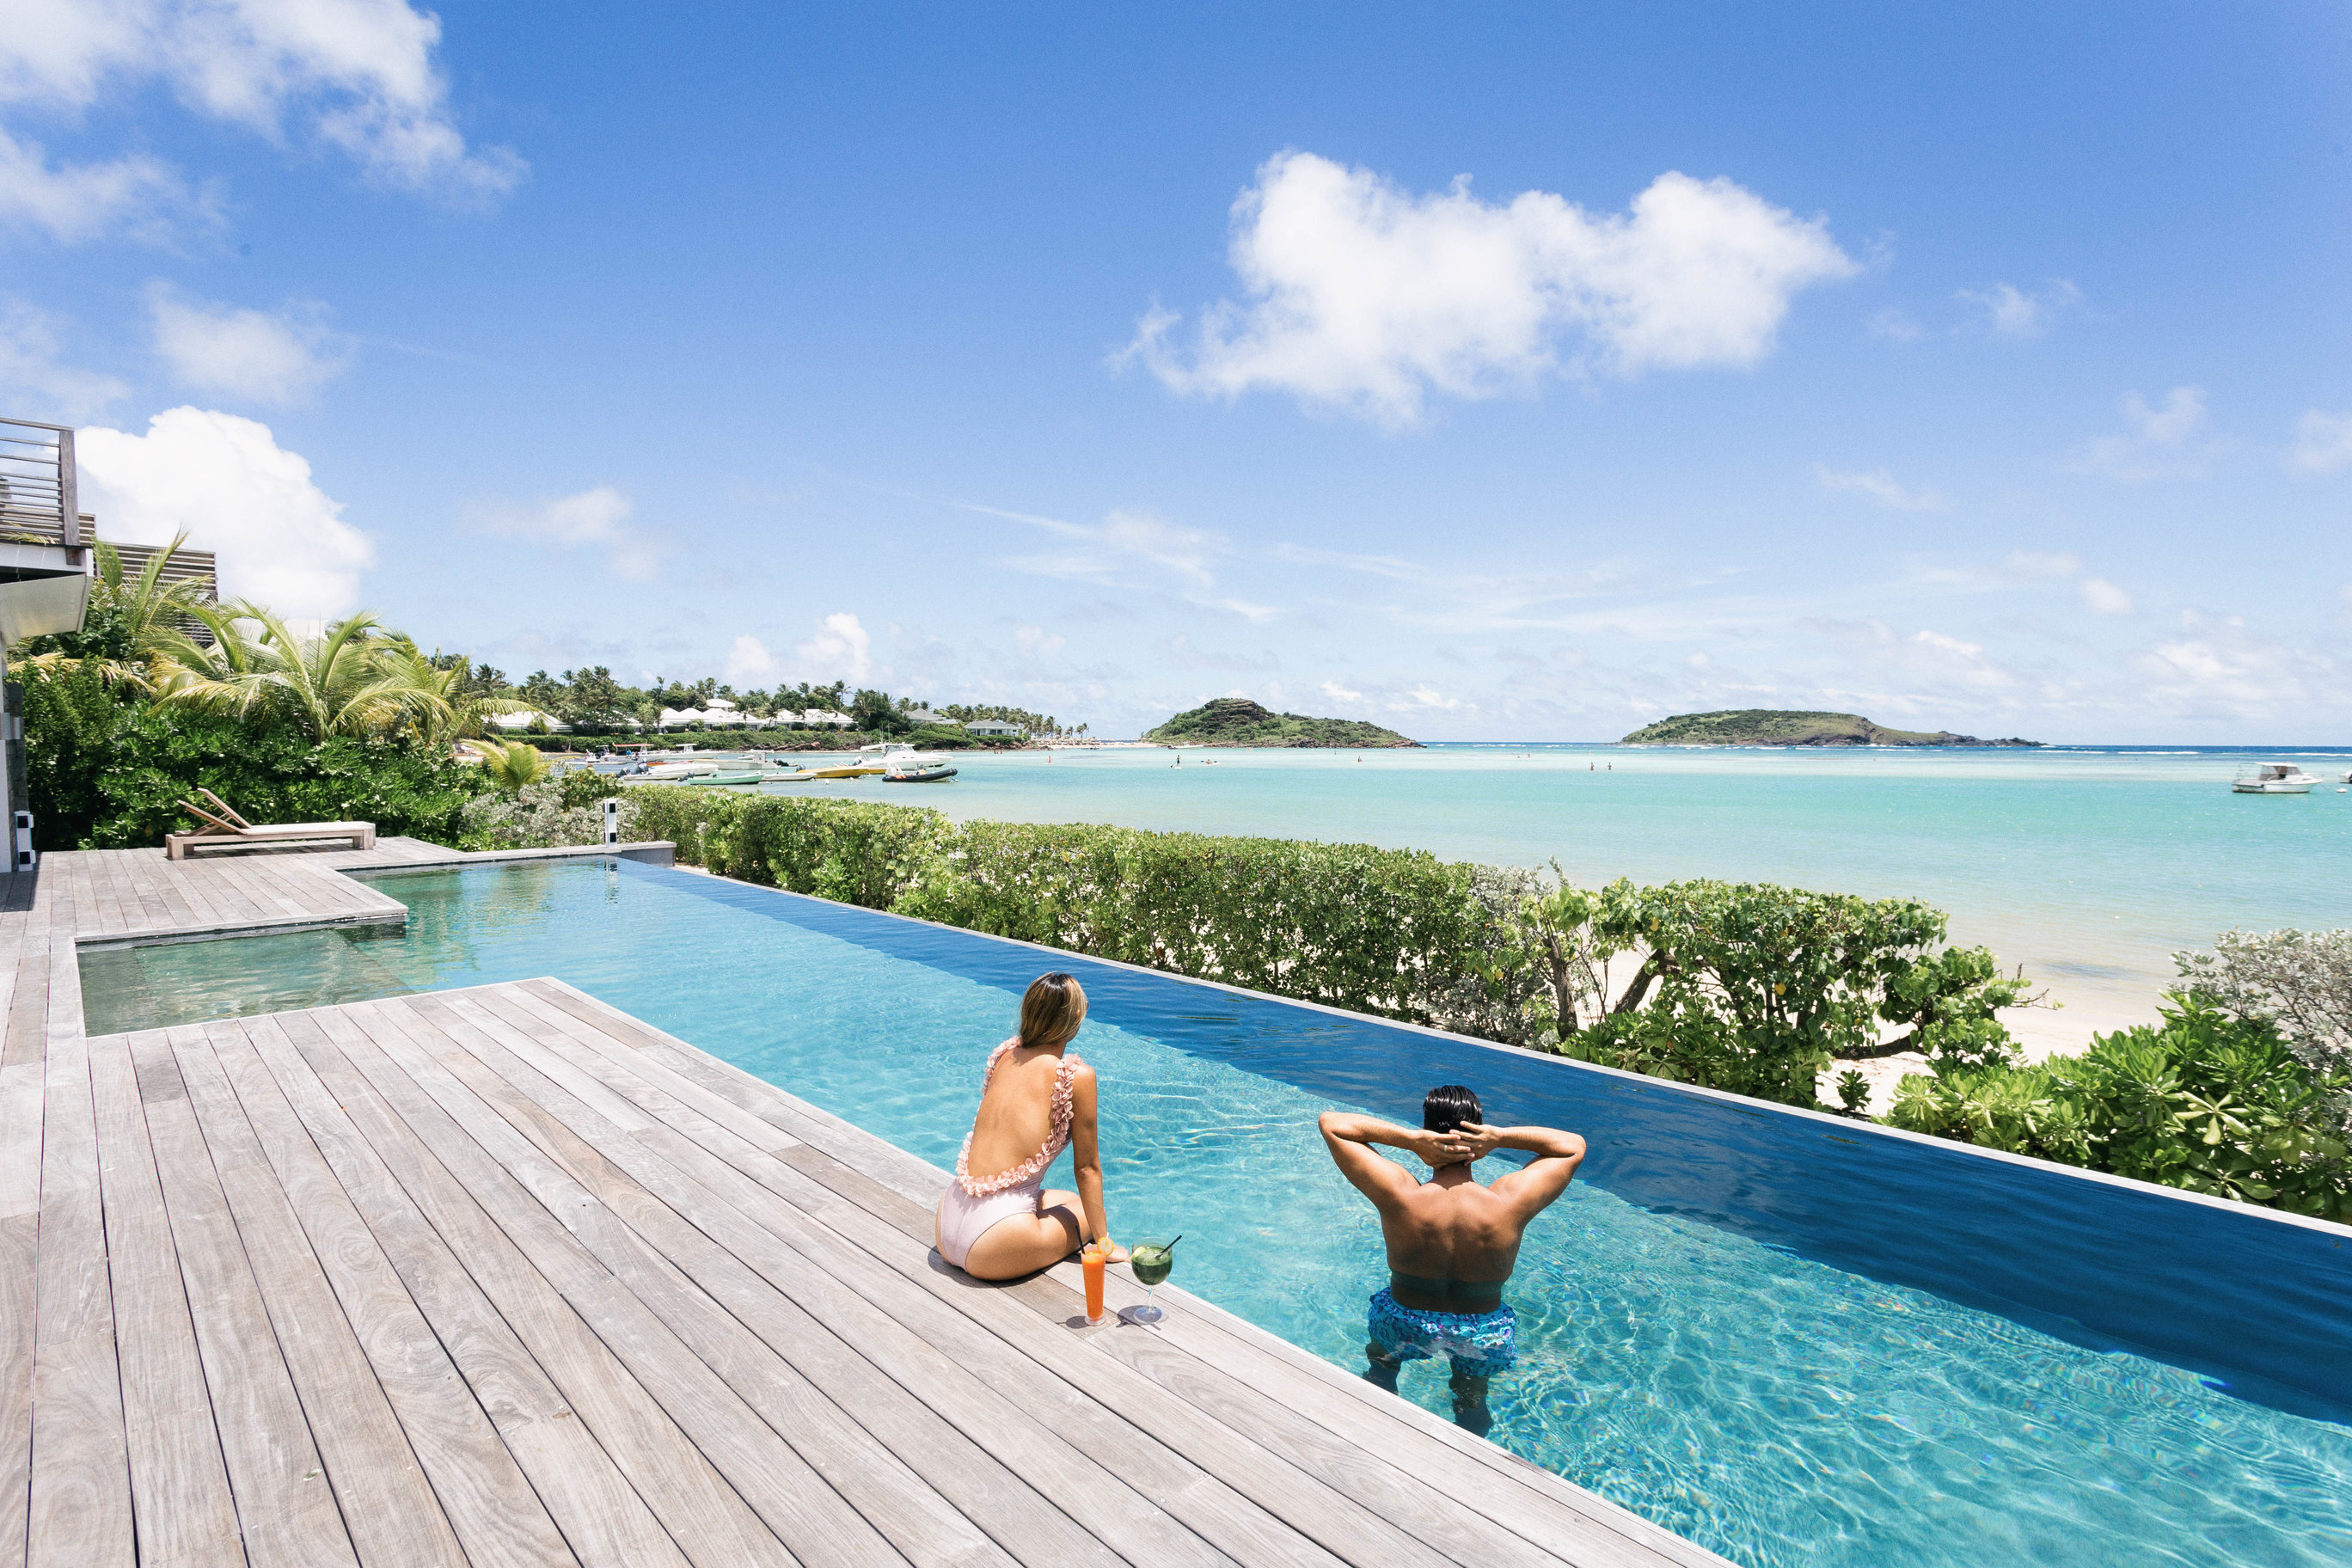 St. Barts' Best Hotels and Restaurants: A Caribbean Journey